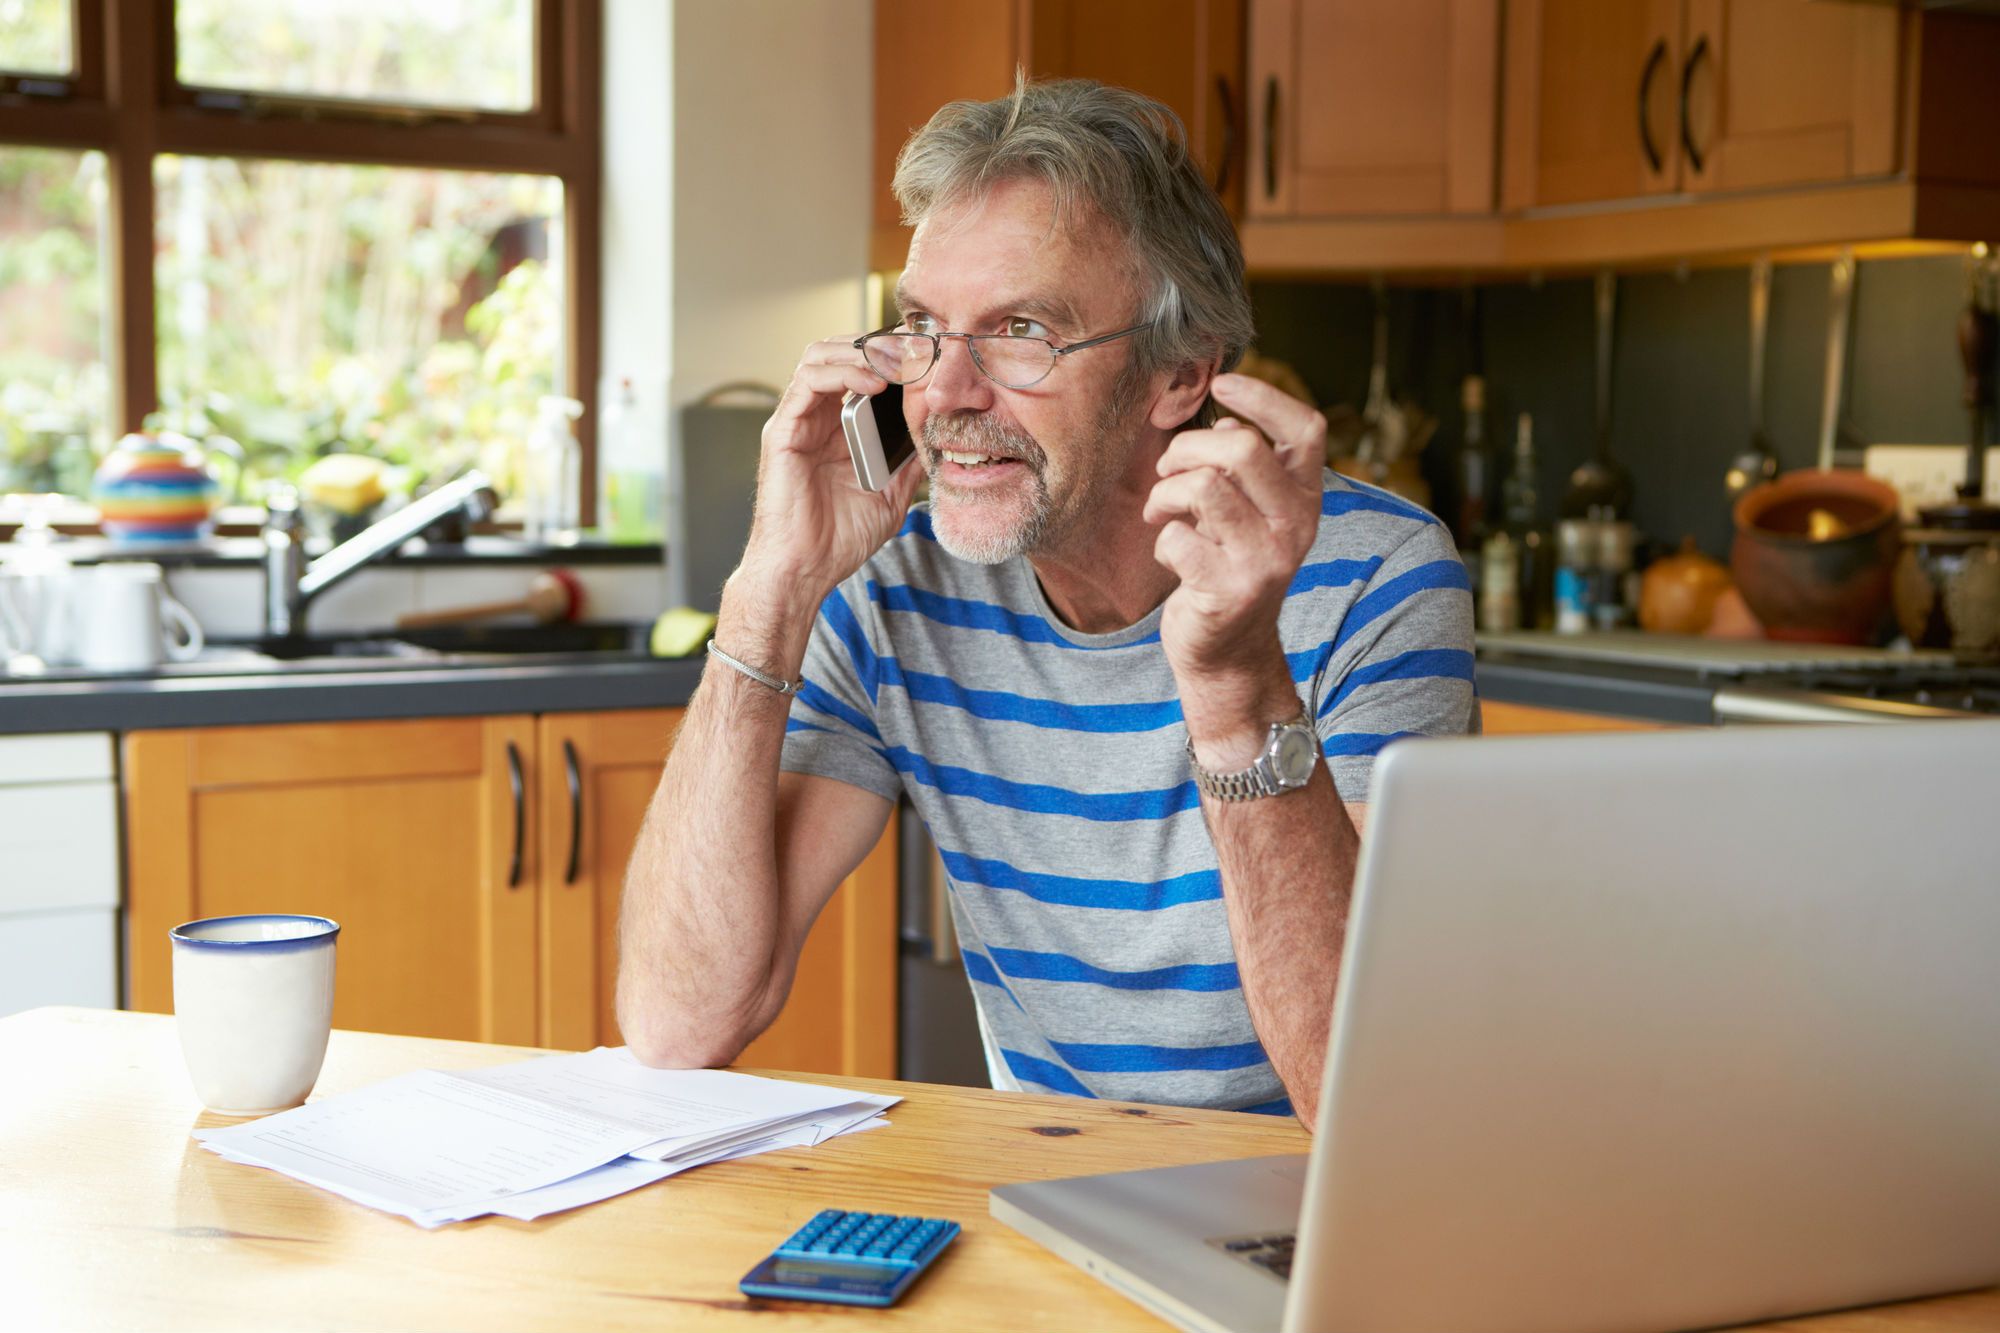 Debt collectors may have the wrong number.